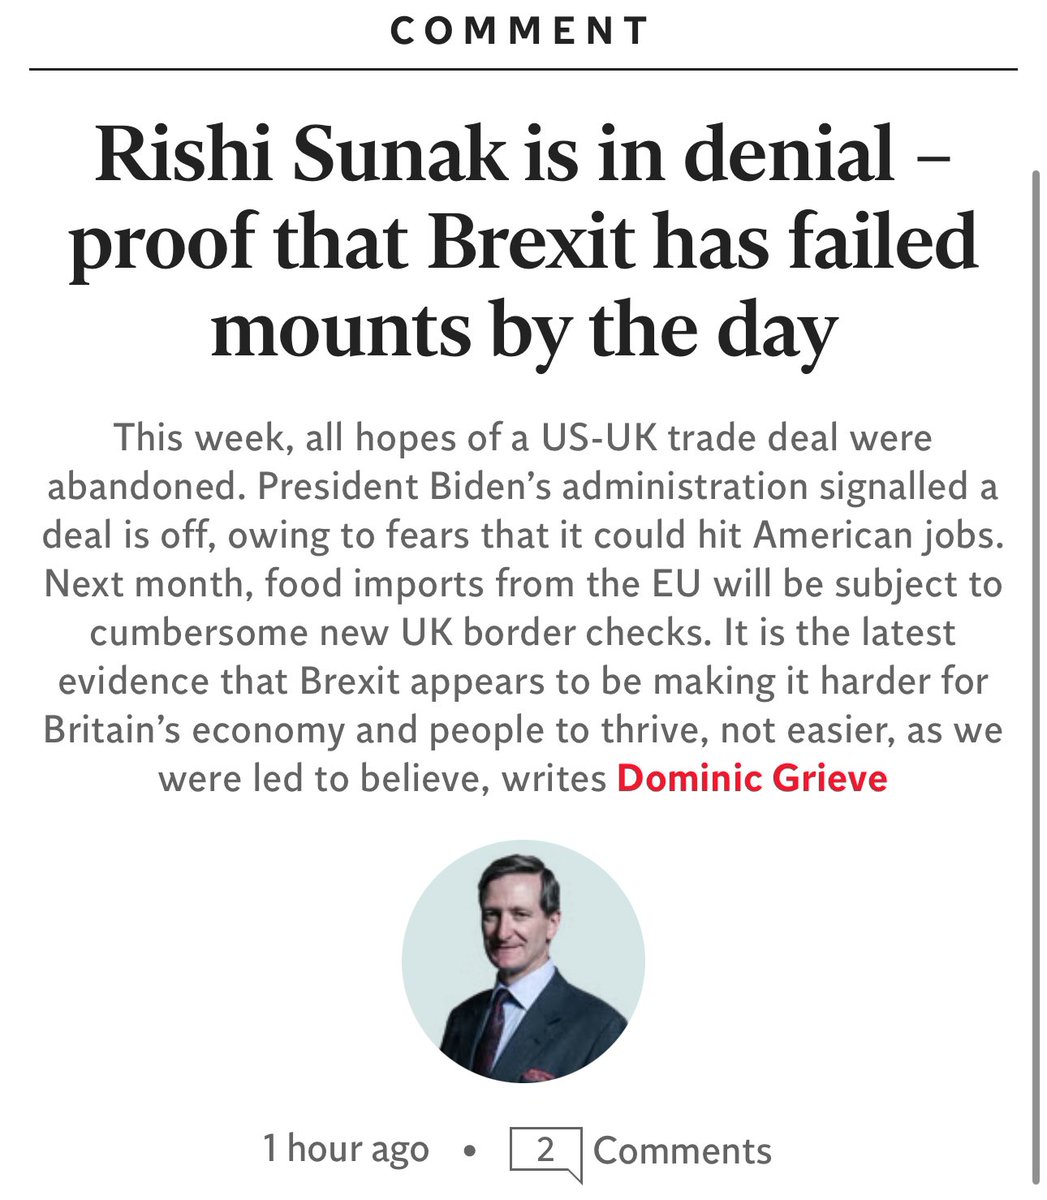 Dominic Grieve bang on the money as always! 

@RishiSunak is in denial and #BrexitHasFailed 

Businesses are today raising alarm to be relieved of the enormous weight of #brexit red tape. 

Where is the sense in continuing with this masochistic reality of Brexit?…